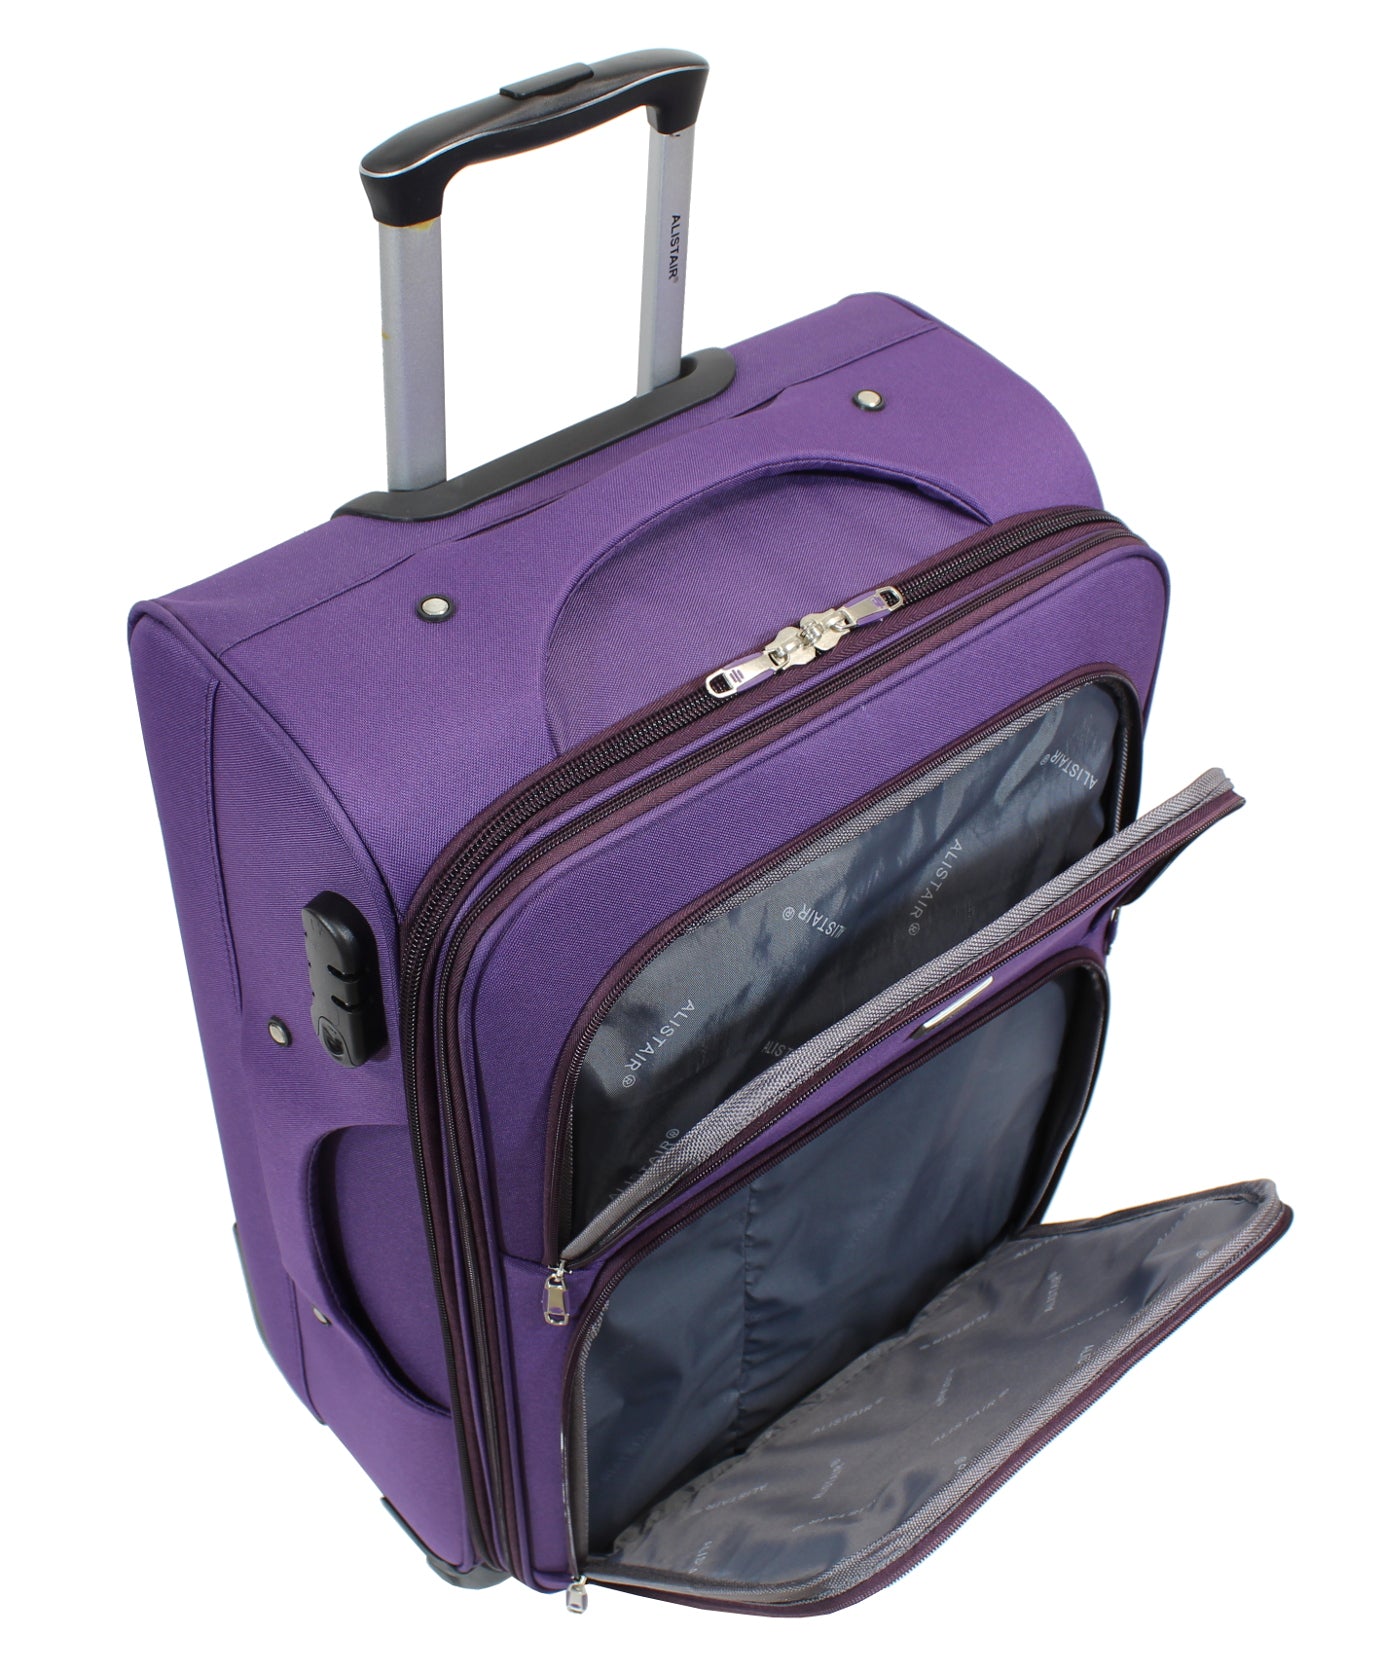 Alistair "Plume" Valise Taille Moyenne 67cm